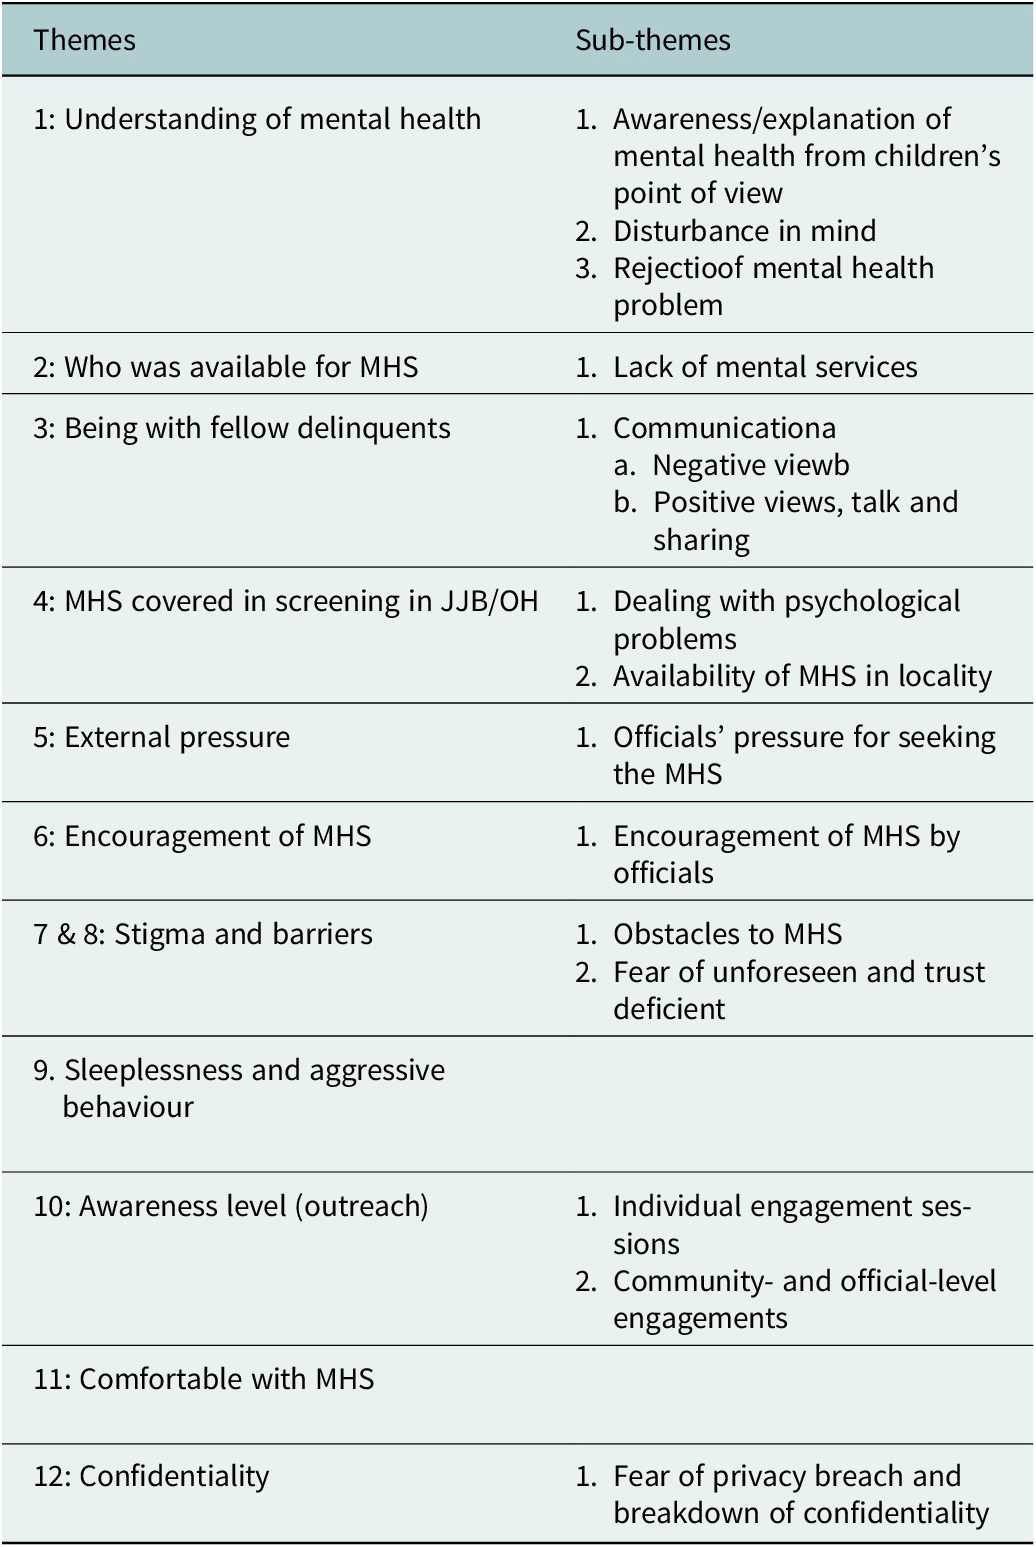 Perceptions of mental health services among the children who are